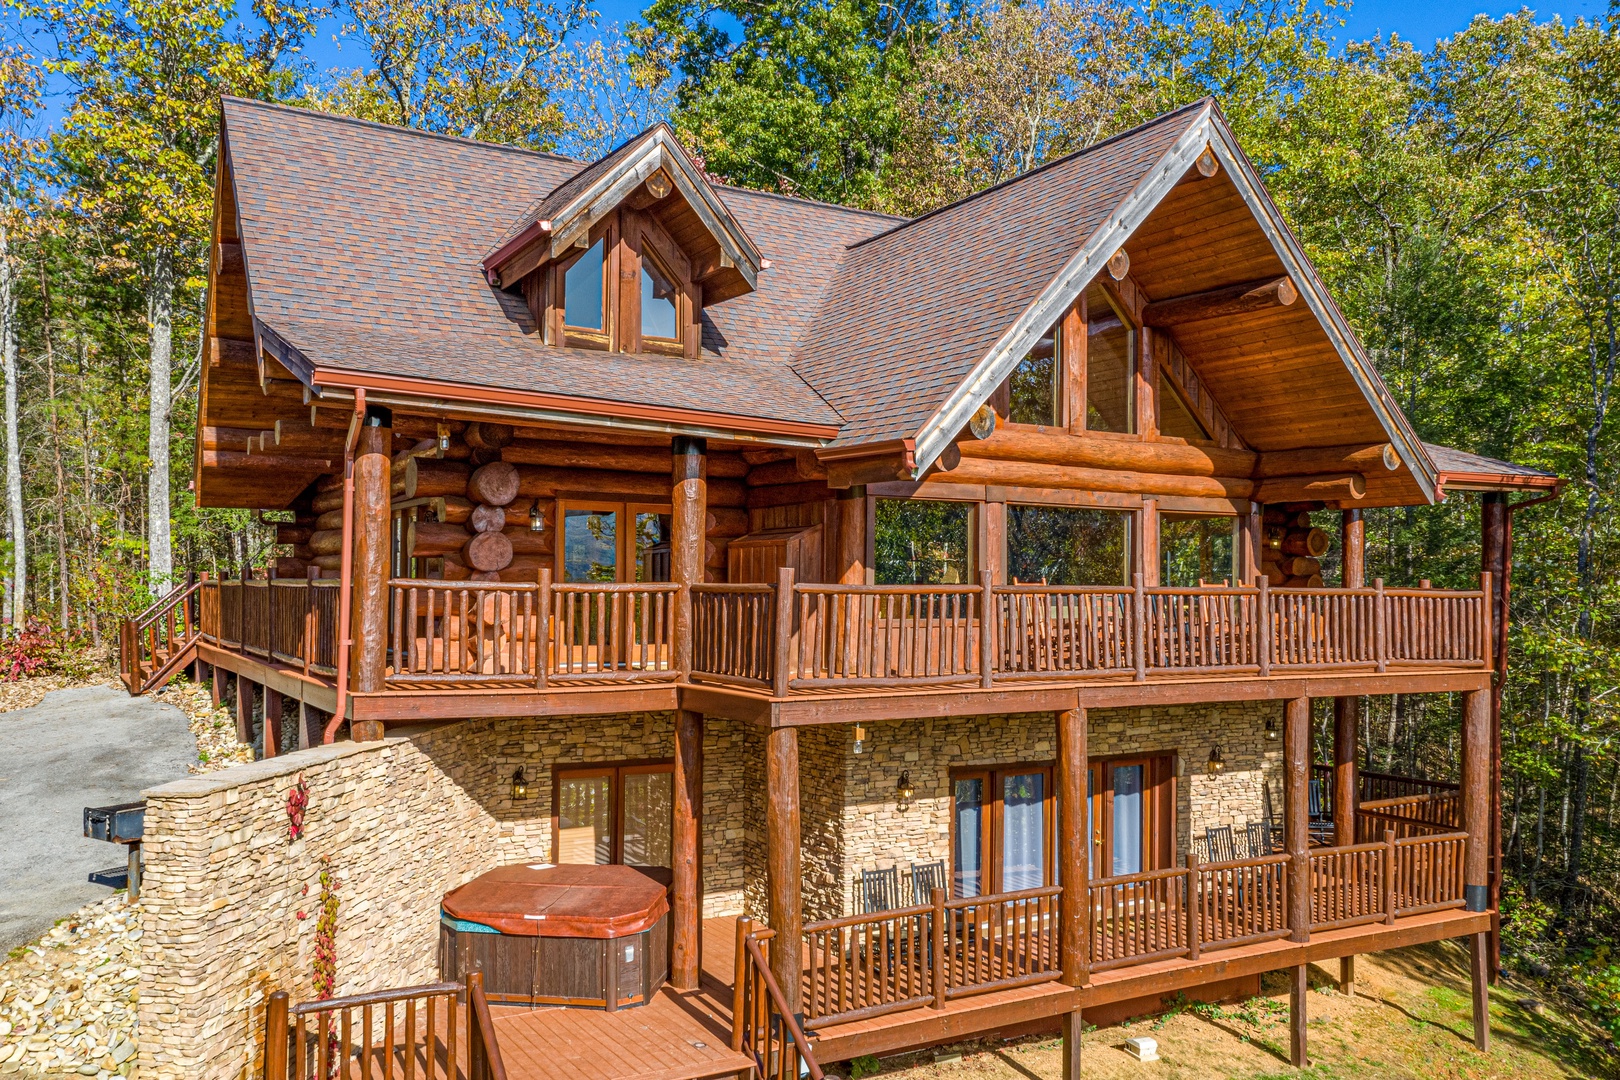 View of the decks at Grizzly's Den, a 5 bedroom cabin rental located in gatlinburg